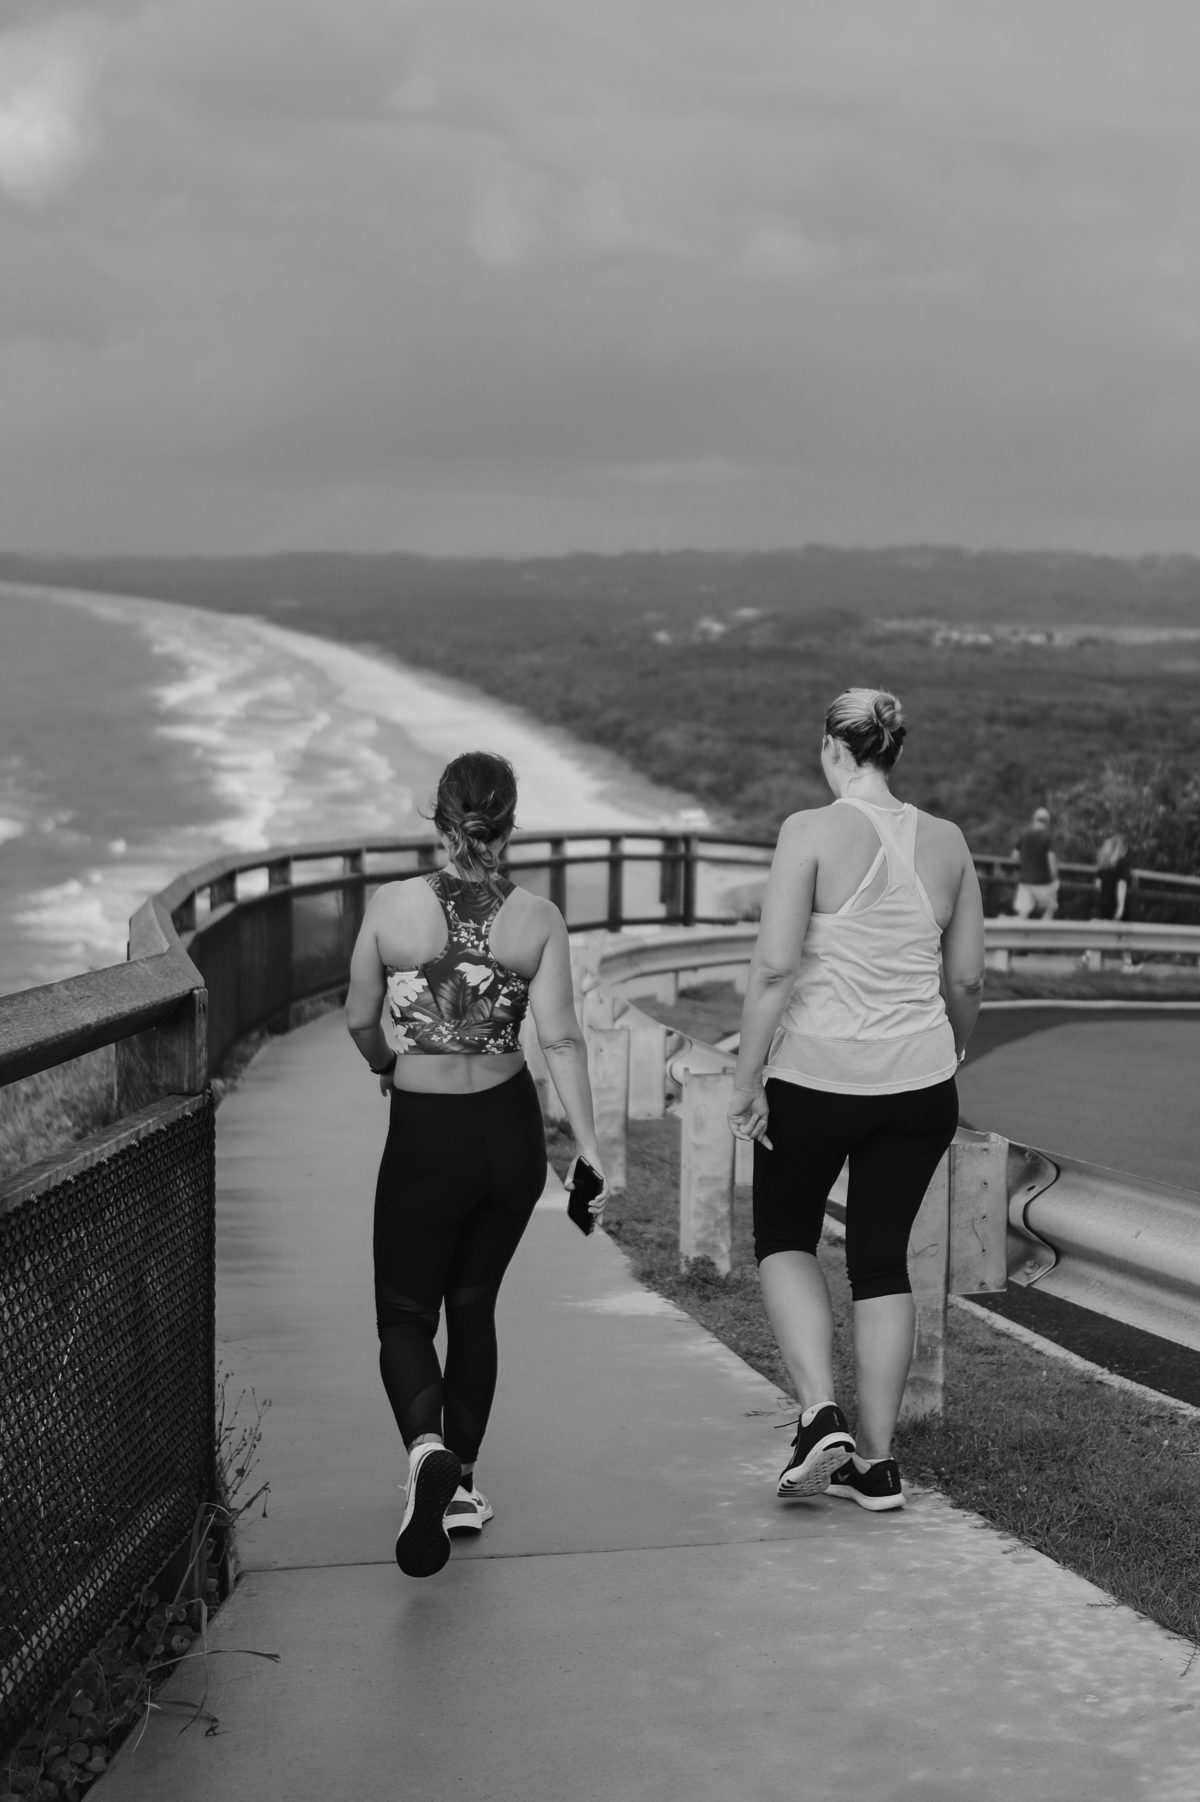 women walking to show how they make fitness progress walking together on a path which looks over the beach seen from behind